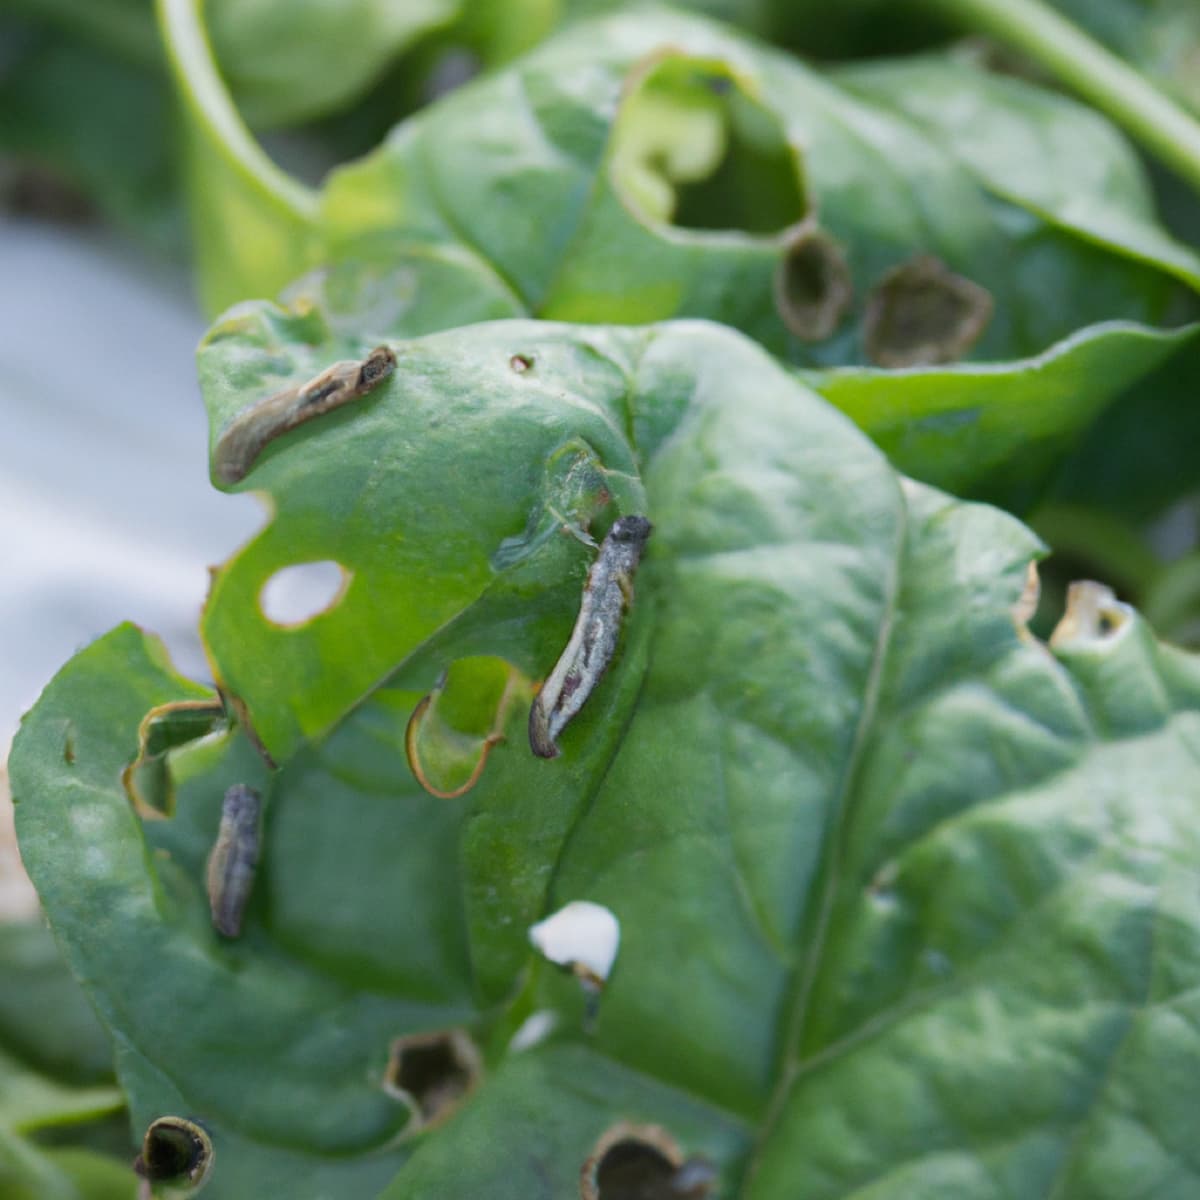 Management of Beet Armyworm in Spinach